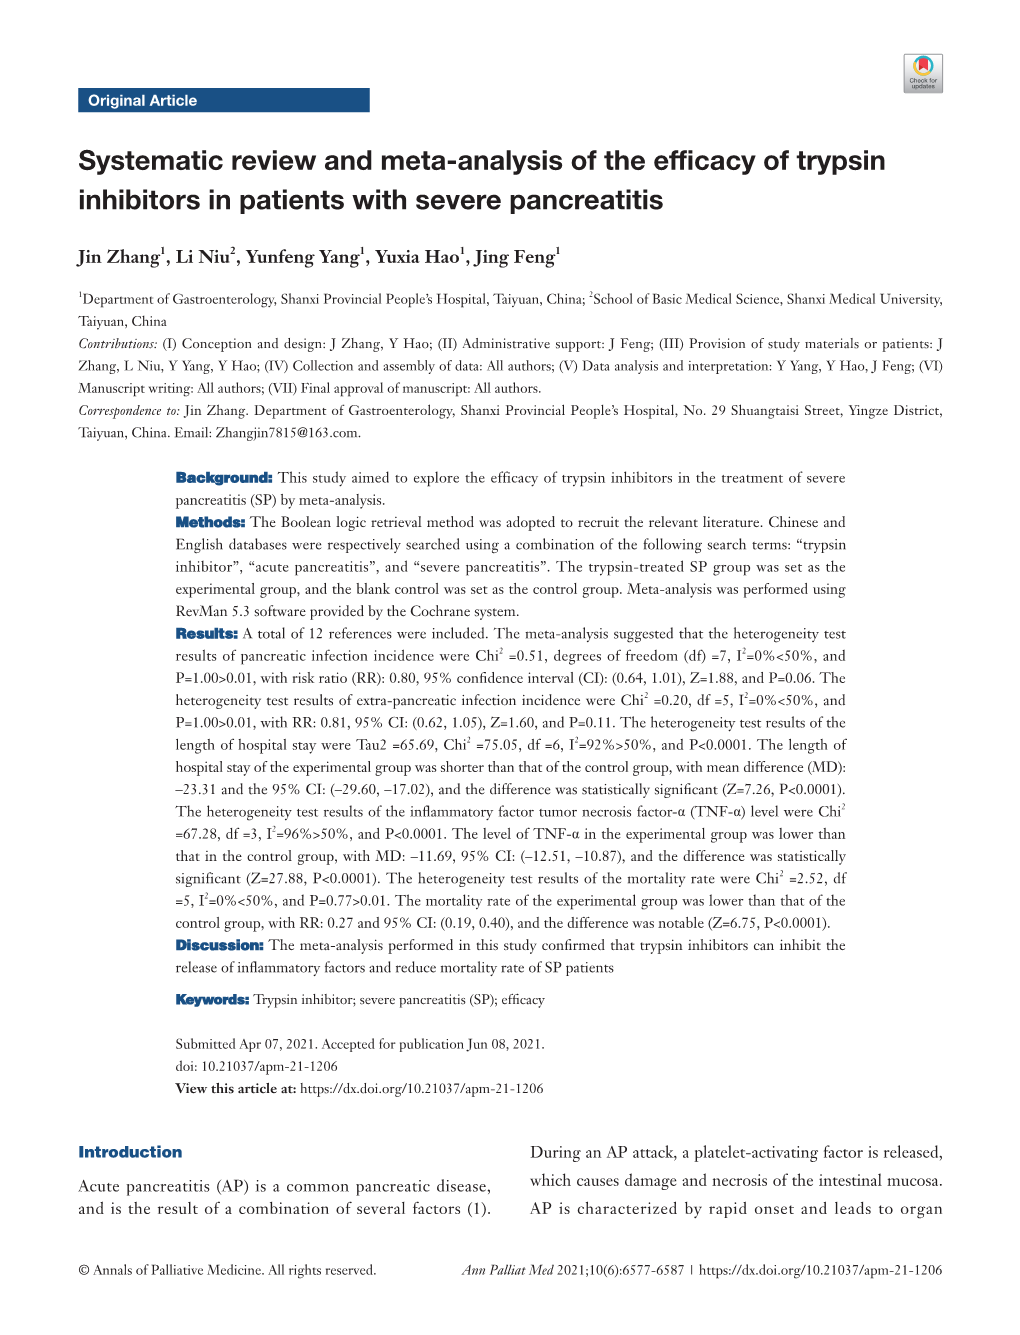 Systematic Review and Meta-Analysis of the Efficacy of Trypsin Inhibitors in Patients with Severe Pancreatitis